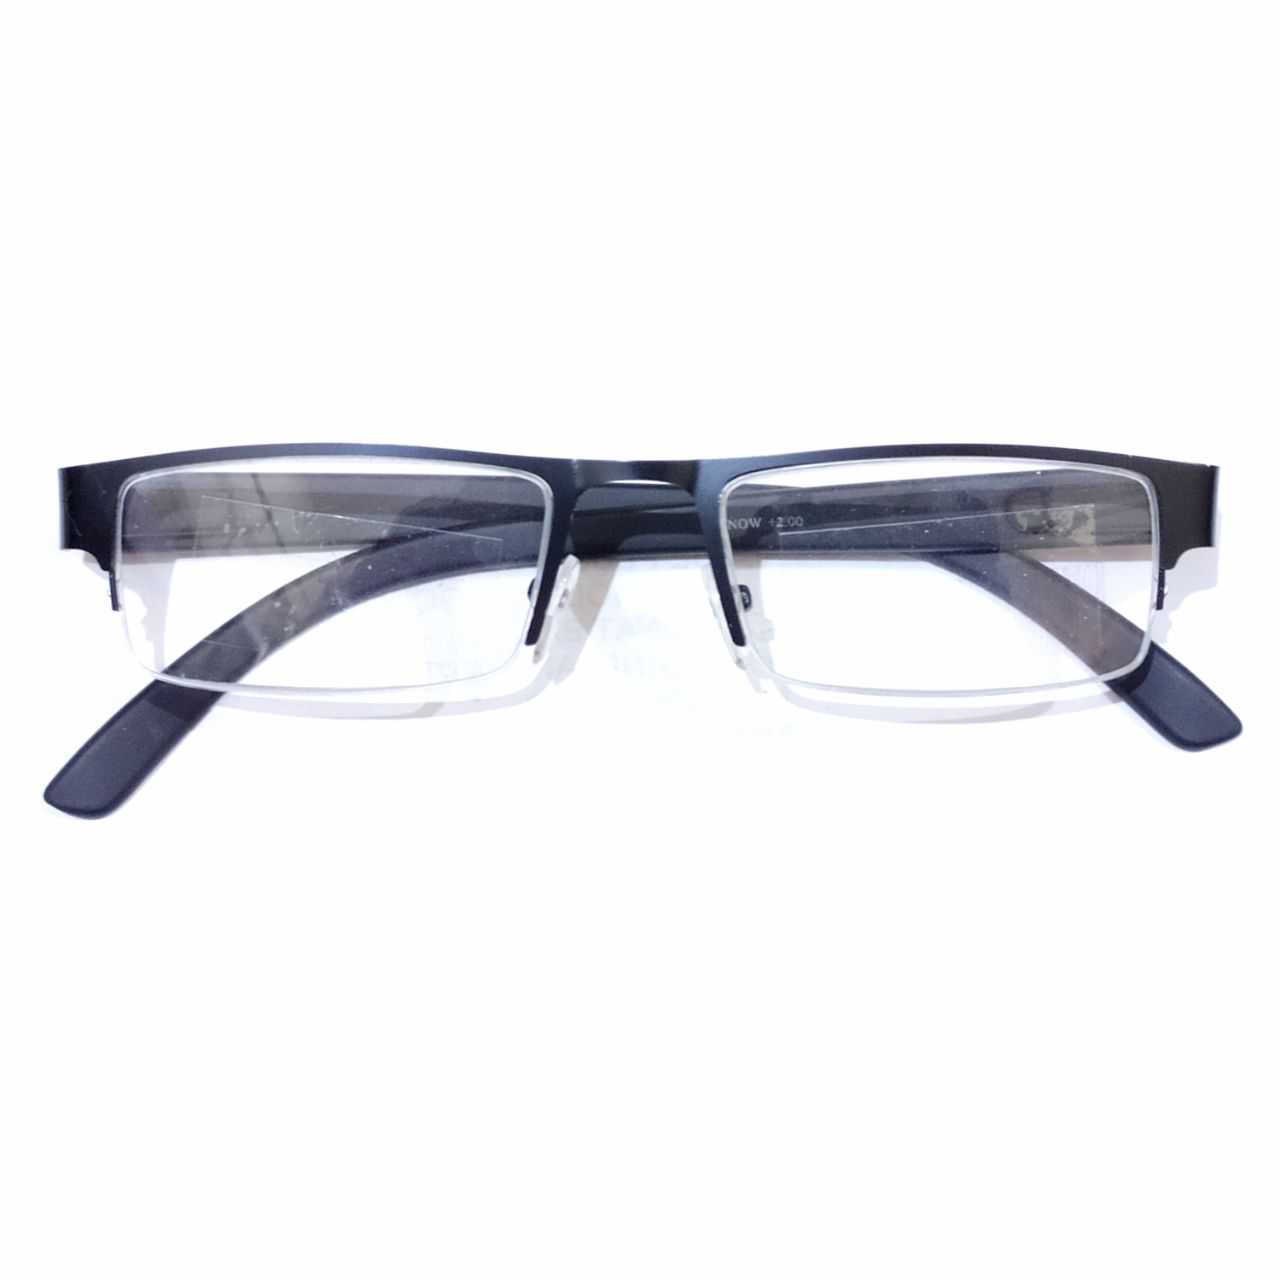 Supra Reading Glasses - Grey Rectangle Metal Frame with Spring Hinges